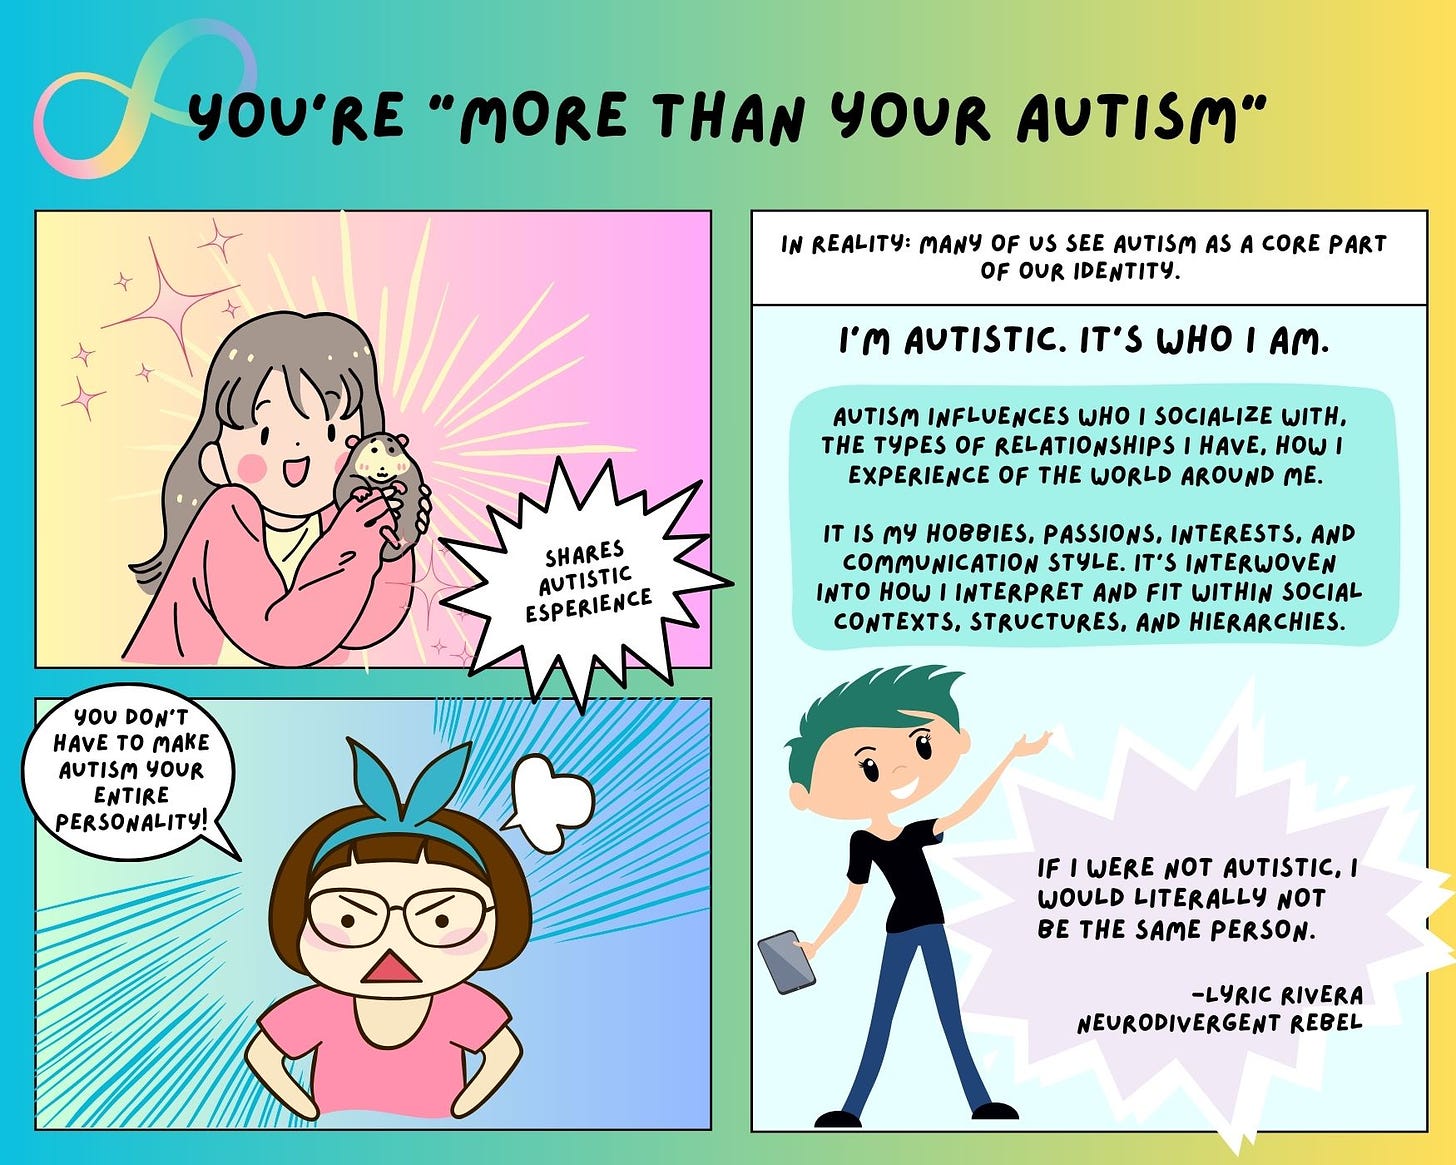 3-panel comic titled “You’re more than your autism” - the first panel, an excited person is sharing their Autistic experience. The second panel is a frustrated person scolding them, saying, “You don’t have to make autism your entire personality.” - the third panel is a Lyric emoji with the following text: In reality, many of us see autism as a core part of our identity. I’m Autistic. It’s who I am. Autism influences who I socialize with, the types of relationships I have, and how I experience the world around me. It’s my hobbies, passions, interests, and communication style. It’s interwoven into how I interpret and fit within social constructs, structures, and hierarchies. If I were not Autistic, I would literally not be the same person. - Lyric Rivera, NeuroDivergent Rebel